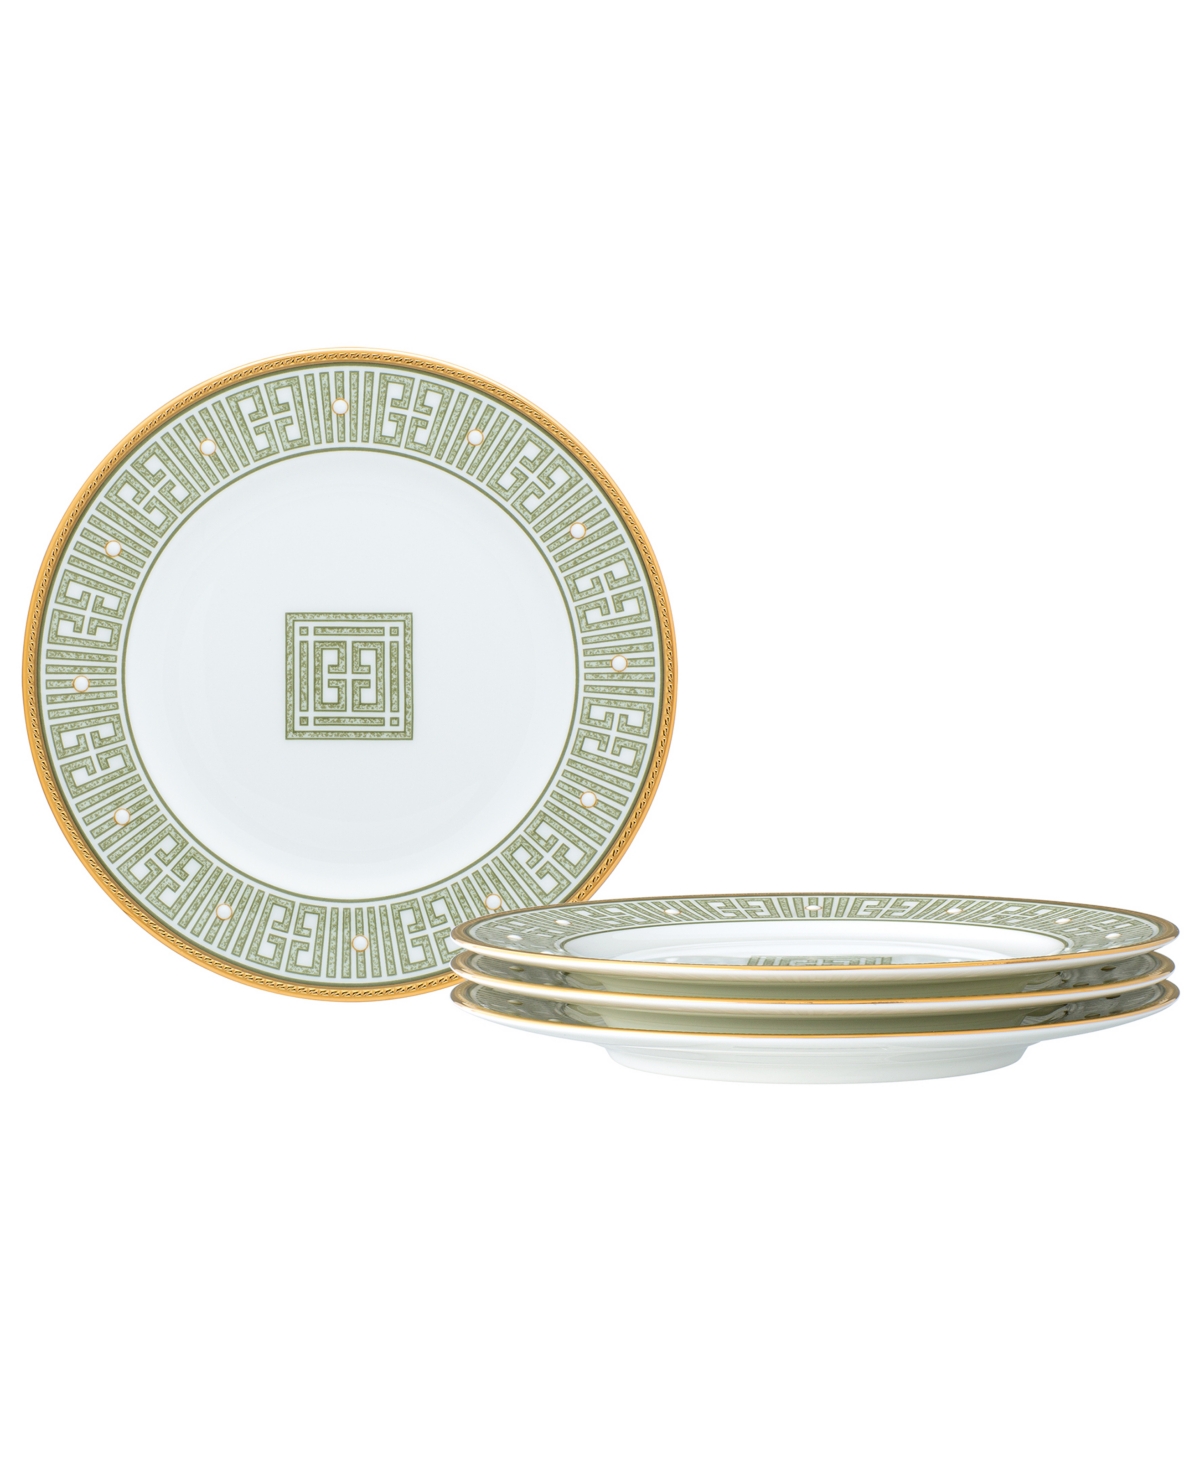 Noritake Infinity 4 Piece Bread Butter/appetizer Plate Set, Service For 4 In Green Gold